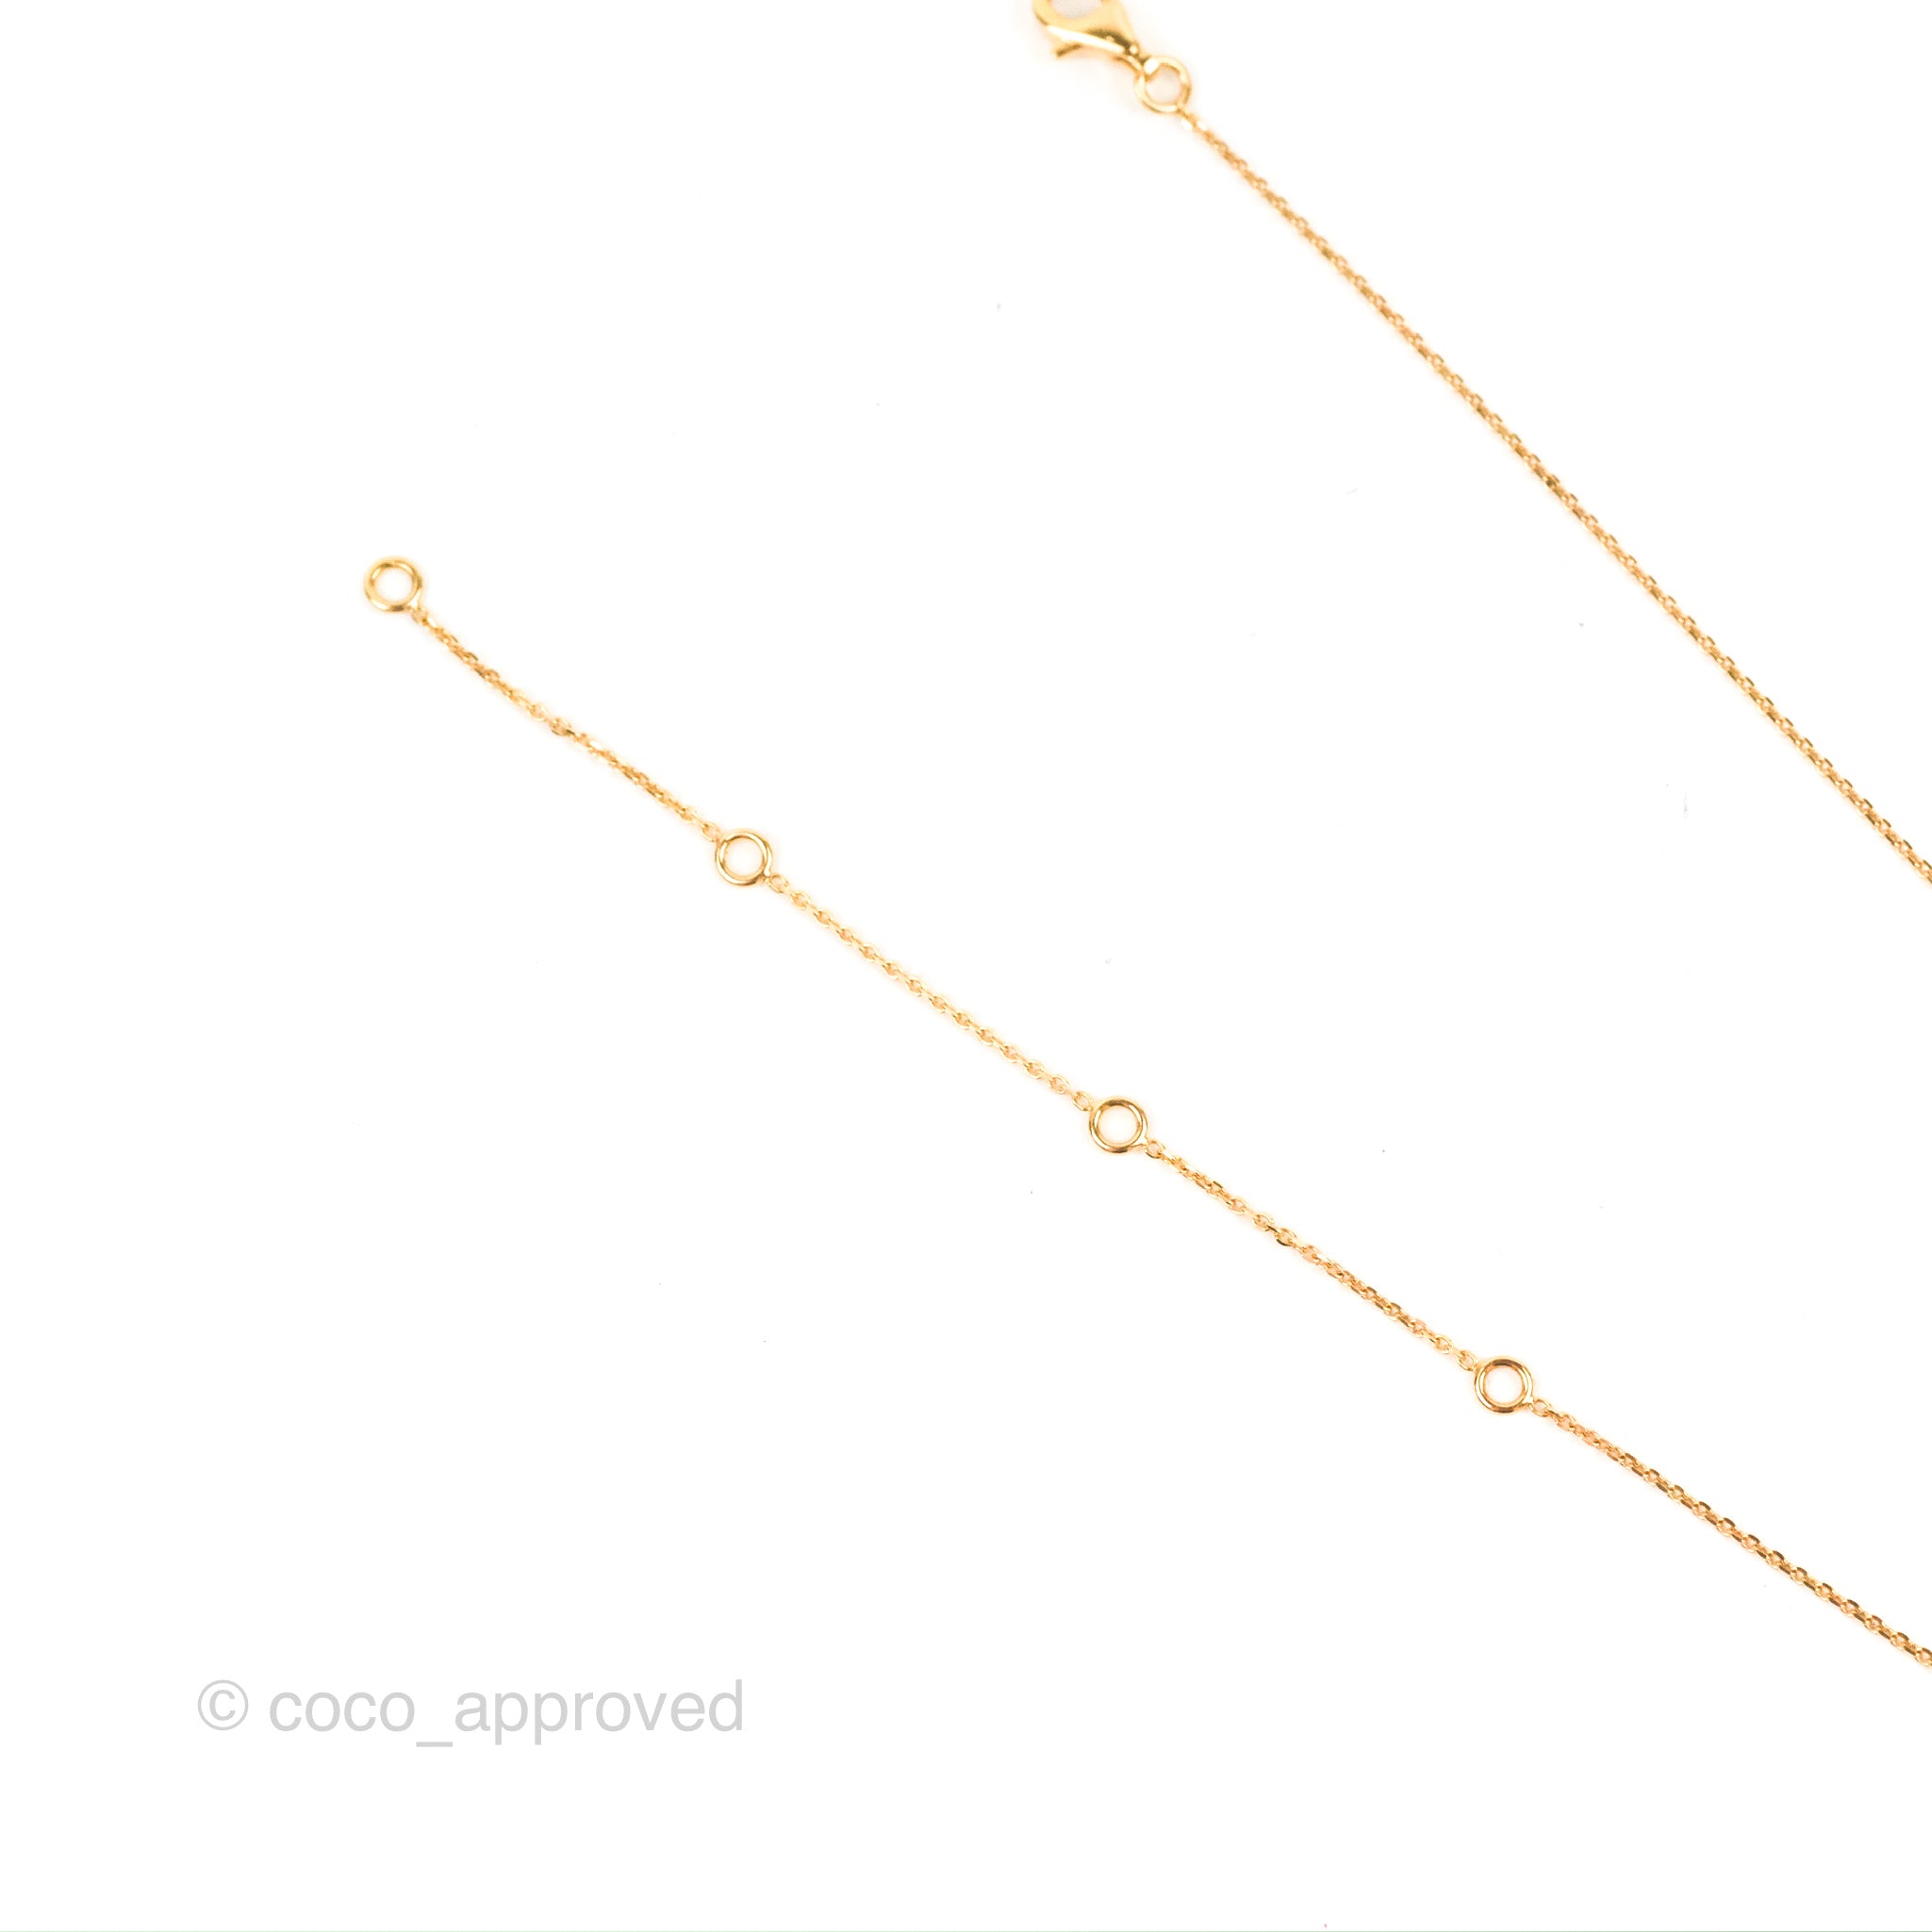 Chanel Extrait De Camelia Necklace Pink Gold – Coco Approved Studio